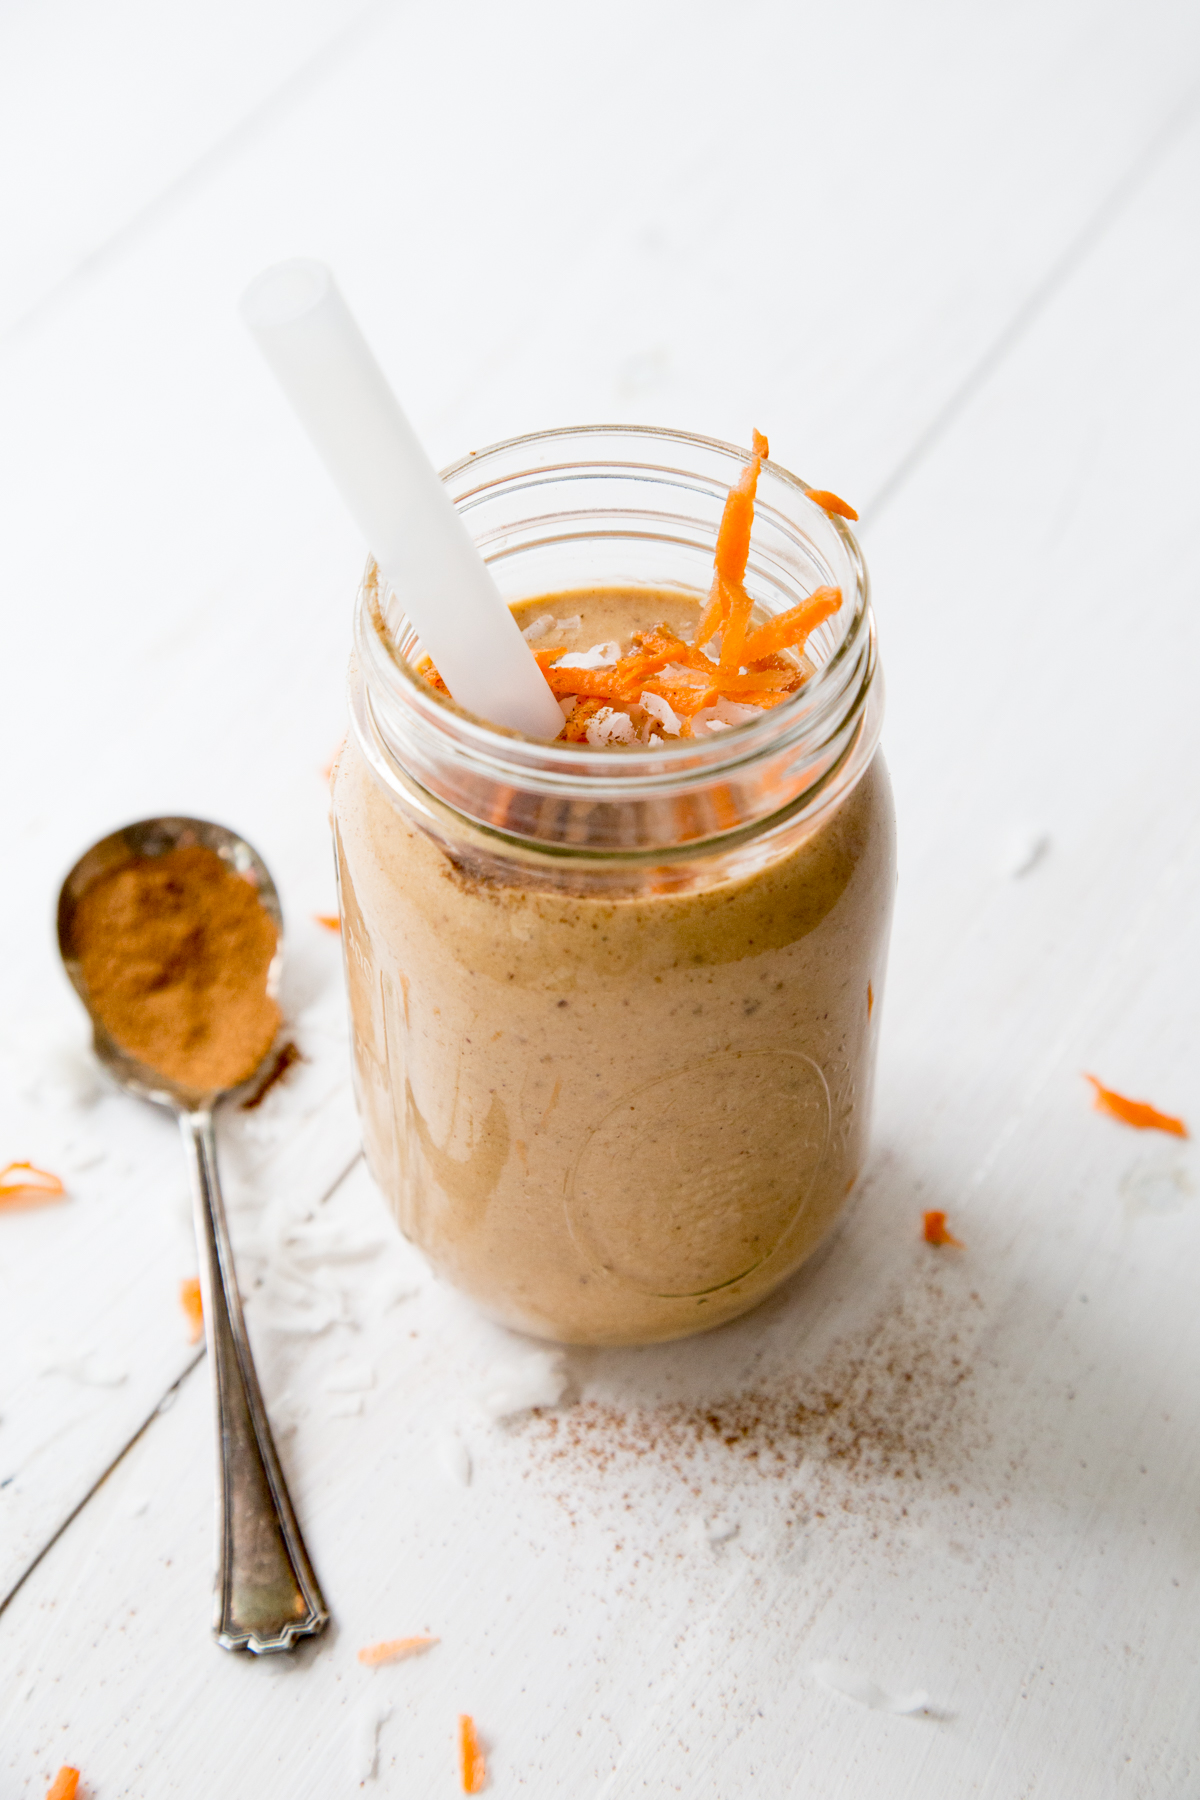 Make these carrot cake smoothie packs with fresh carrots, coconut, cinnamon, and dates to get the most out of your busy morning!